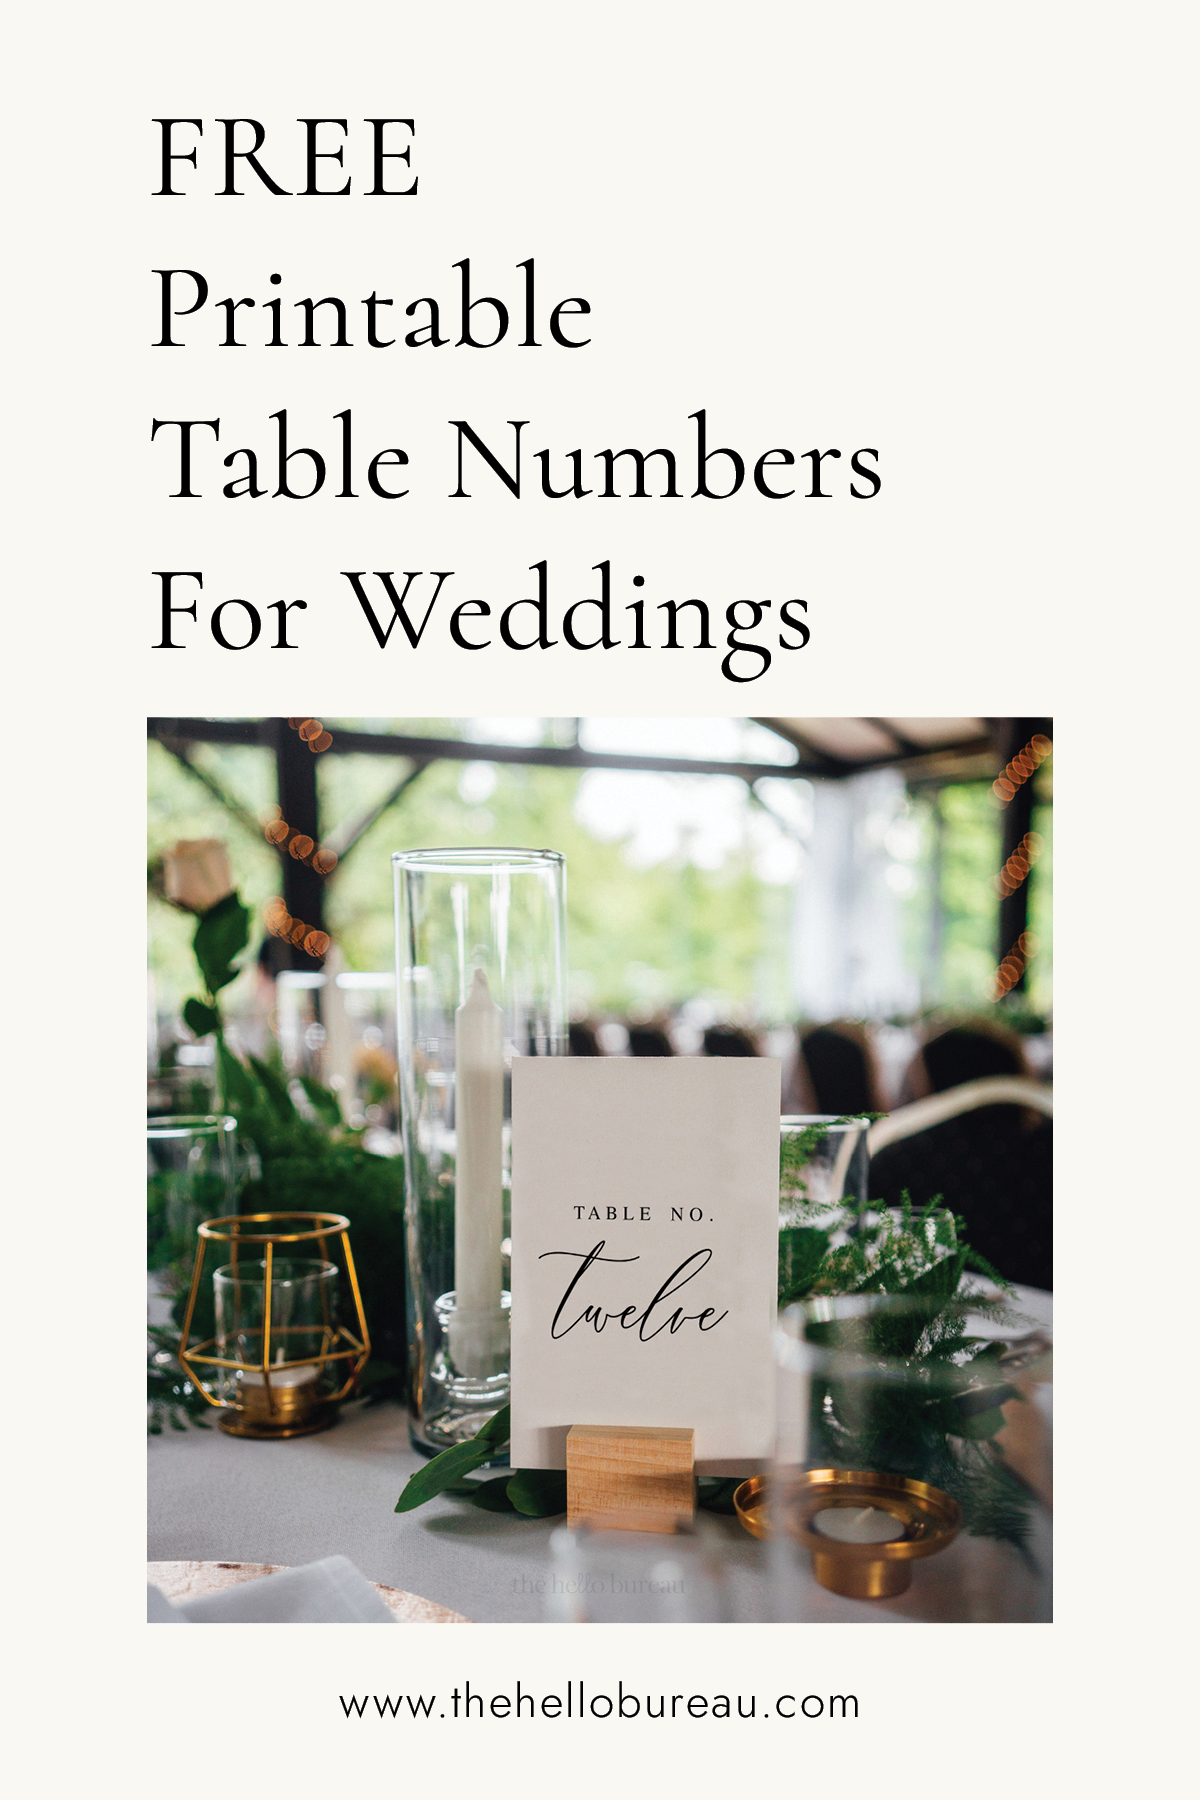 Free Printable Table Numbers For Weddings And Events